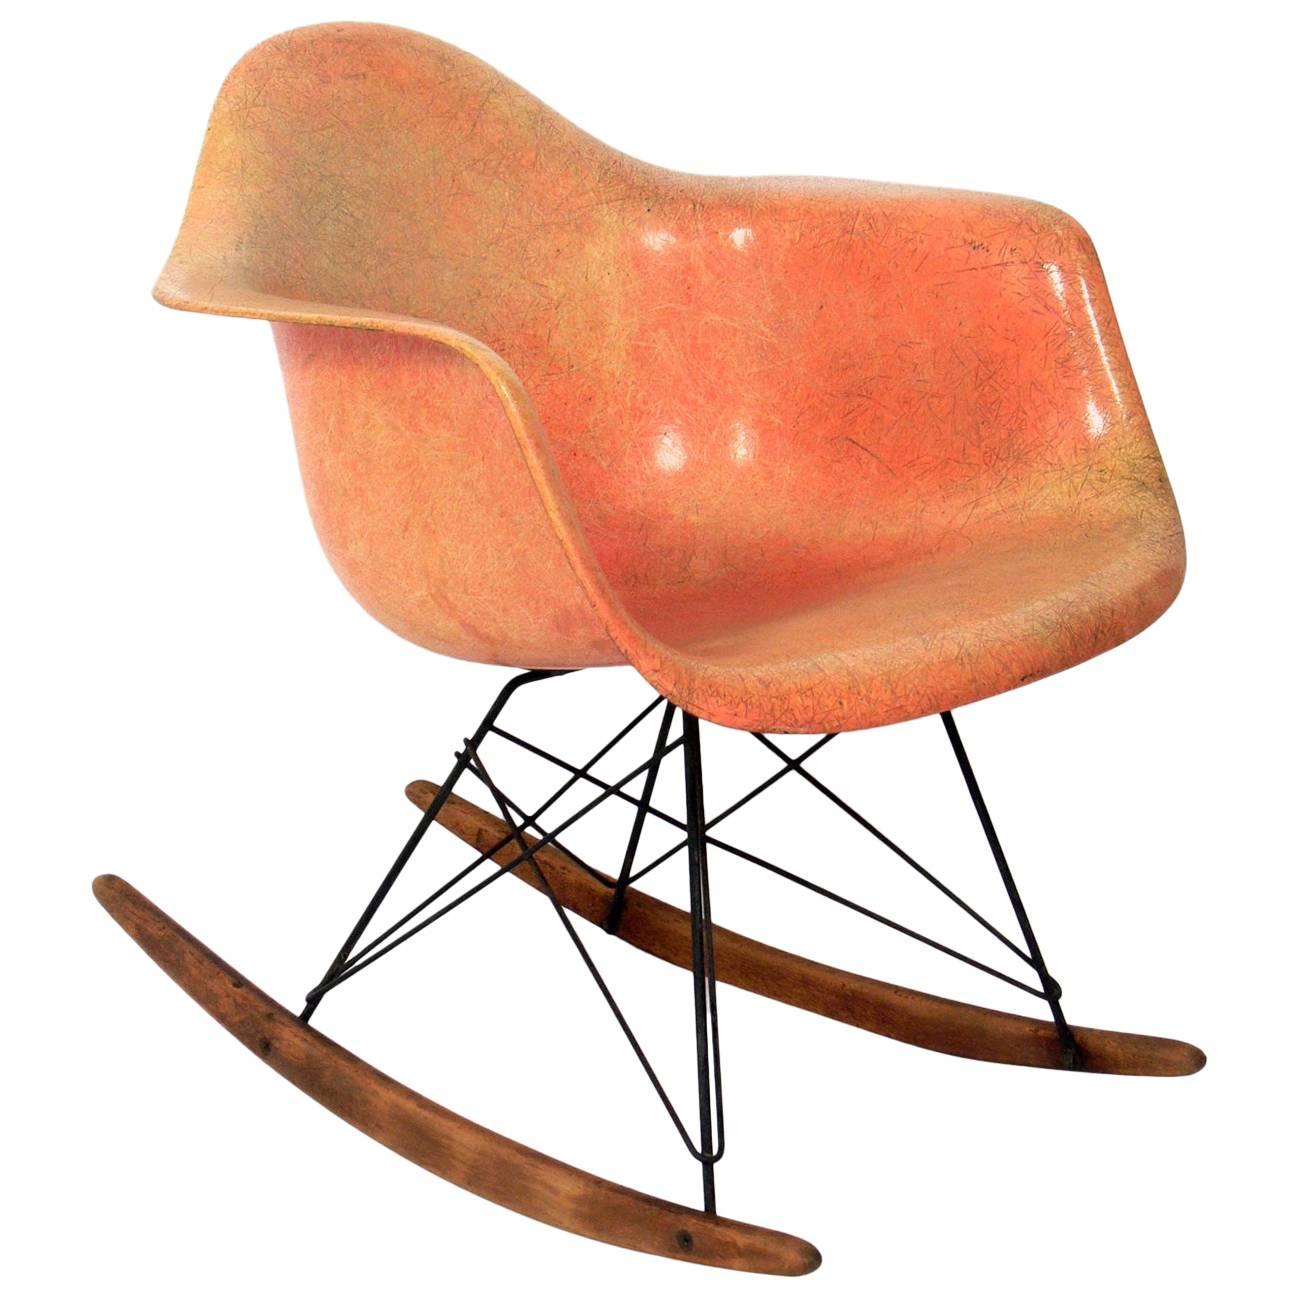 Early All Original Zenith Rope Edge Rocker designed by Charles Eames